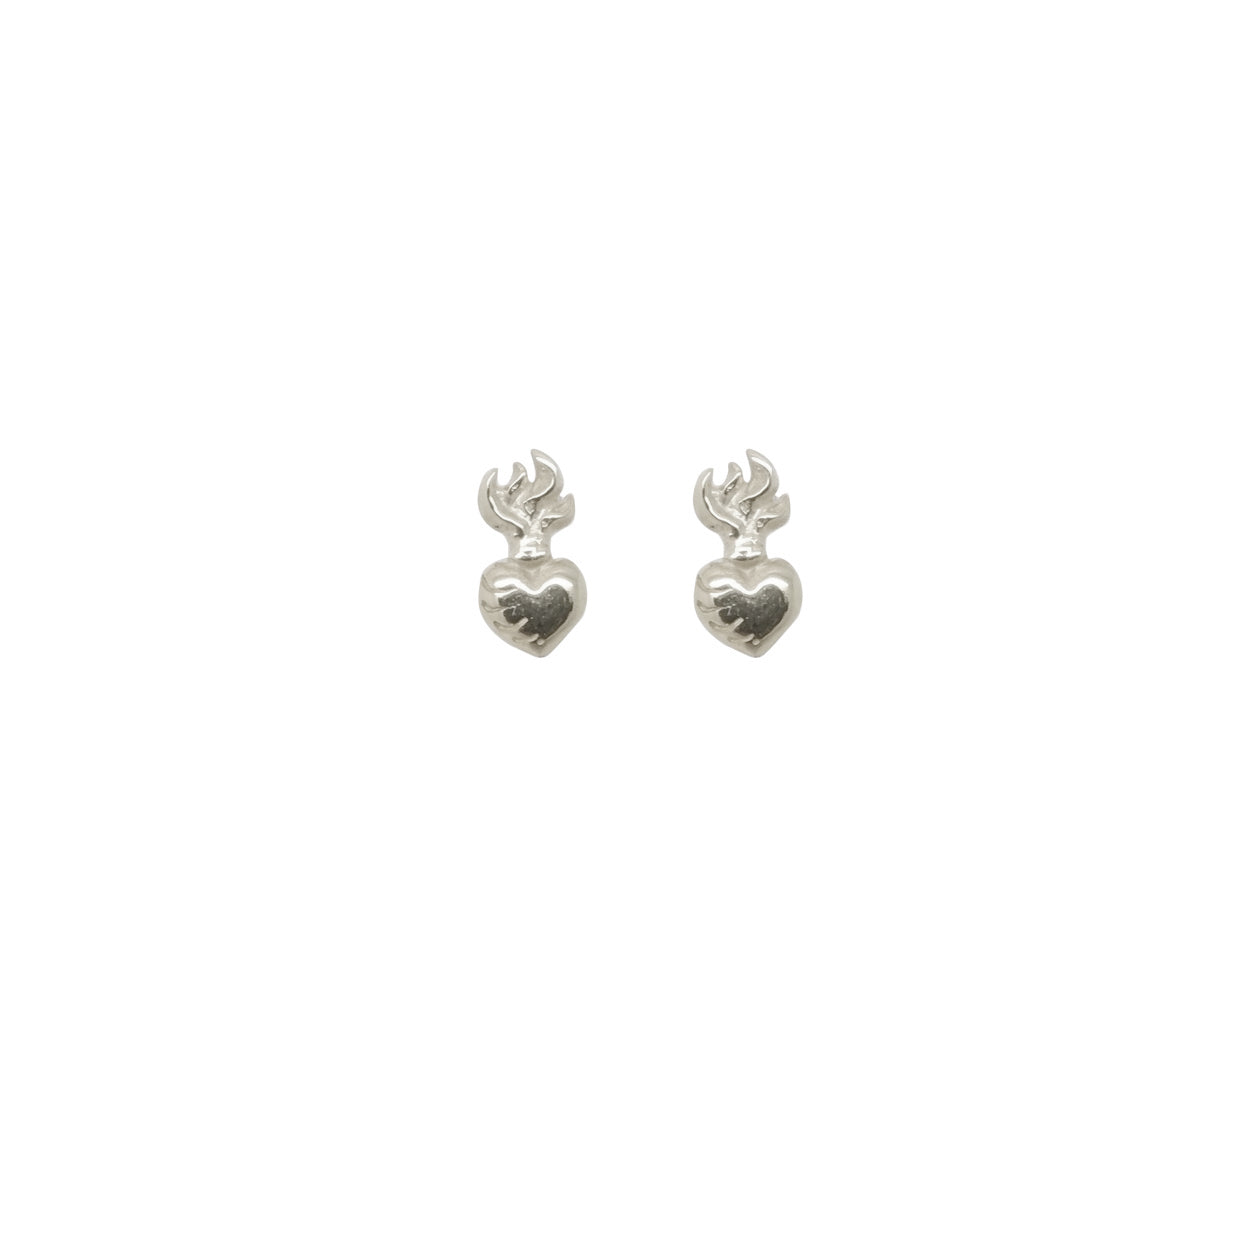 Hunt Of Hounds Sacred Heart Stud Earrings. Small hearts with flame.